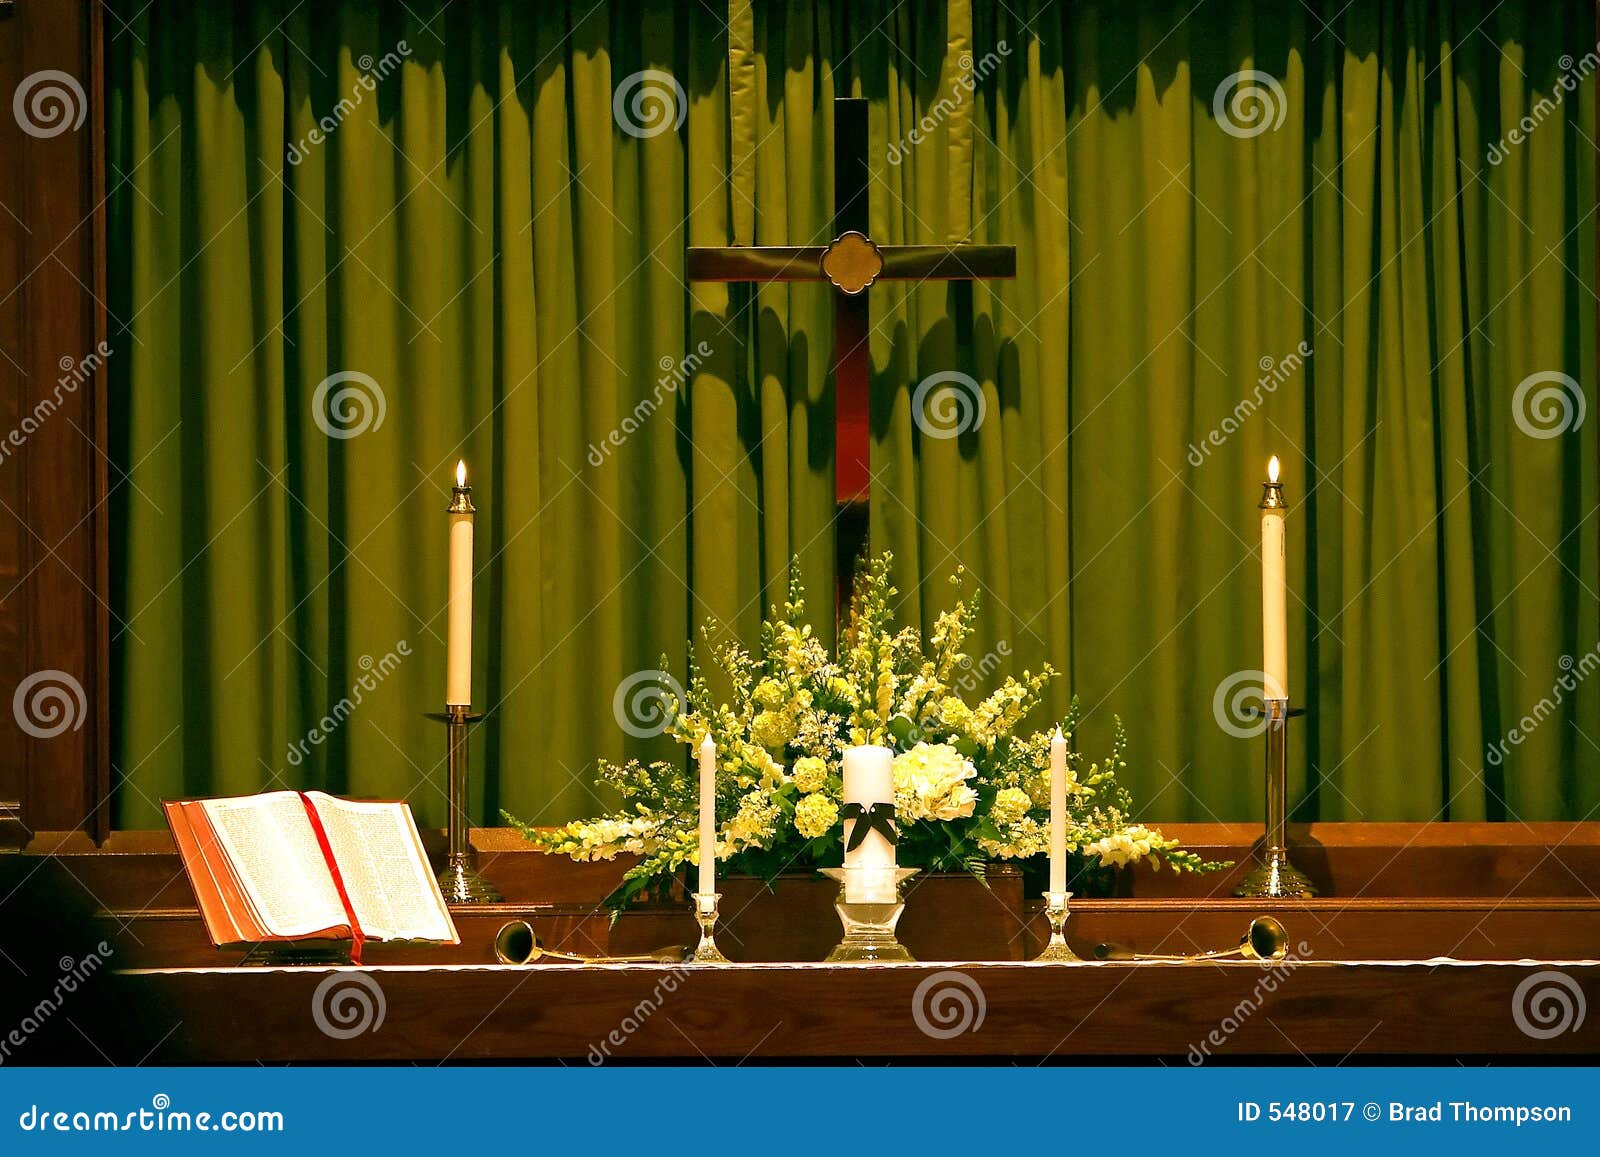 religous altar with bible, cross and candles